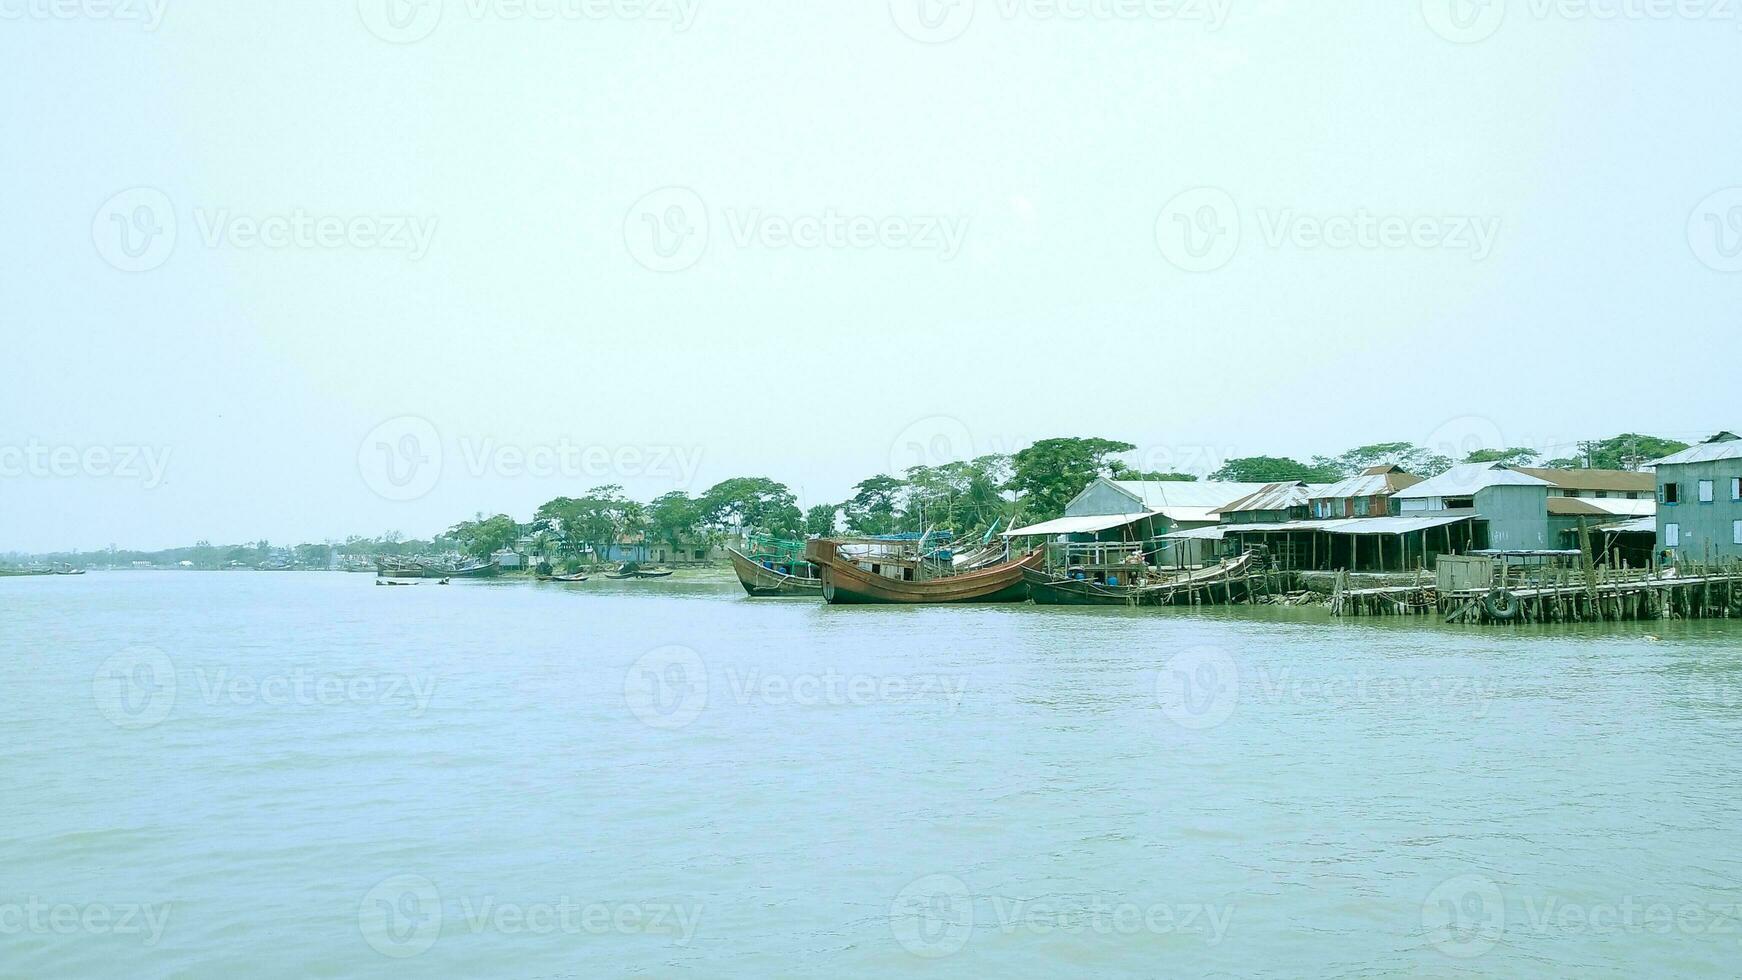 In rural areas of Bangladesh, Boat, river and green tree photo